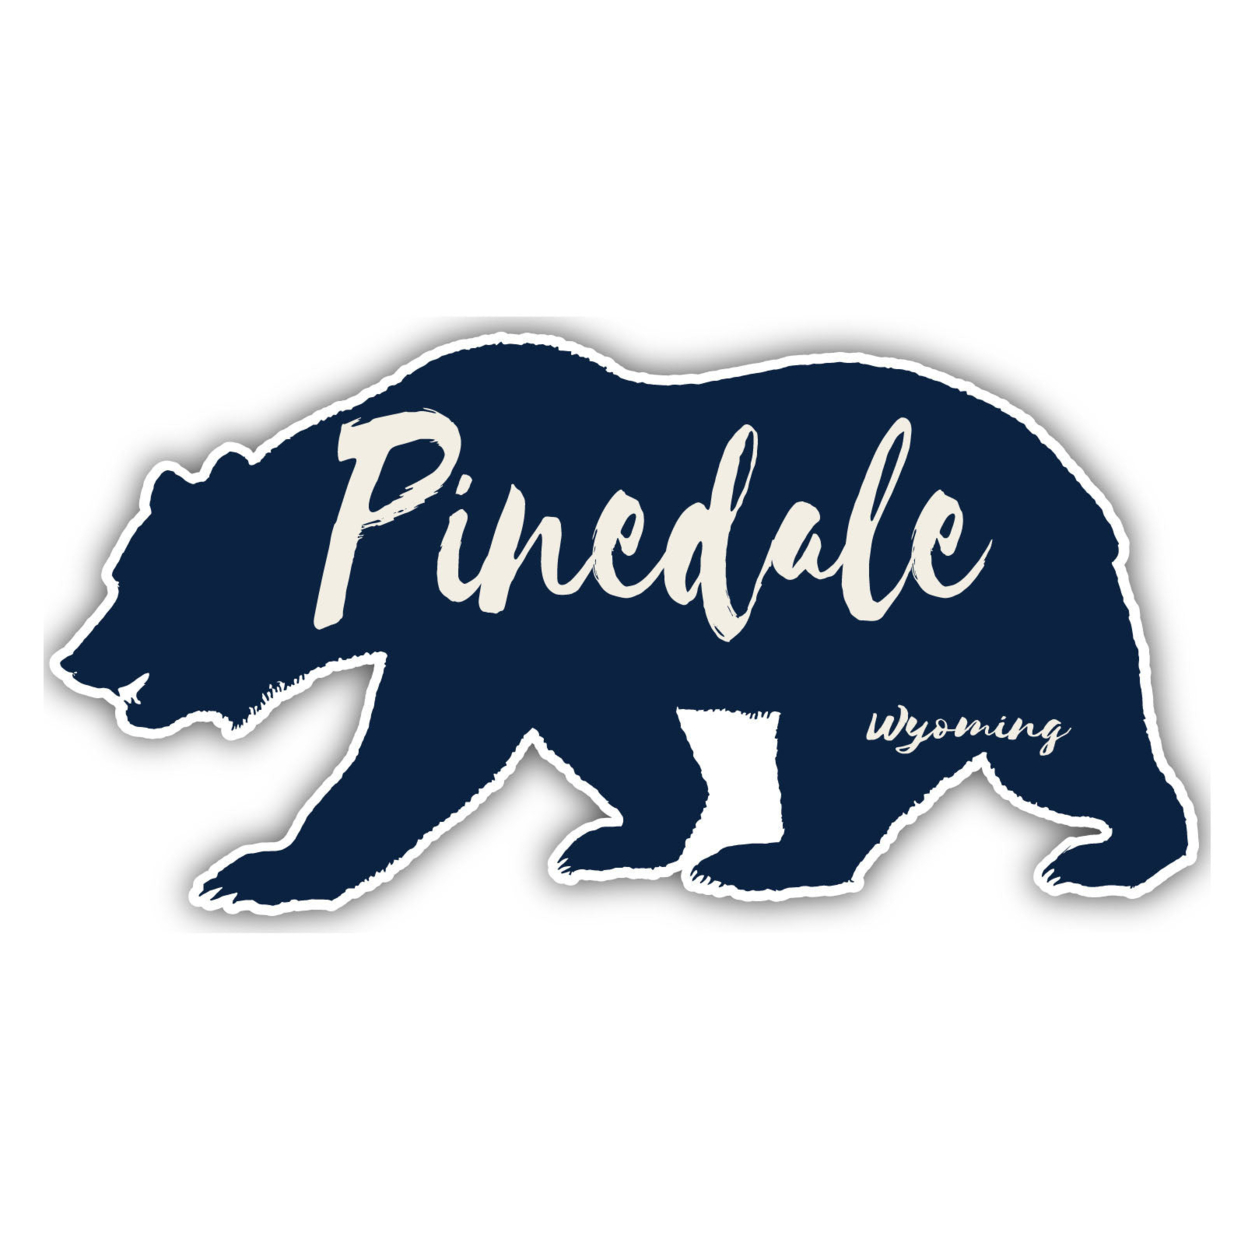 Pinedale Wyoming Souvenir Decorative Stickers (Choose Theme And Size) - Single Unit, 4-Inch, Tent